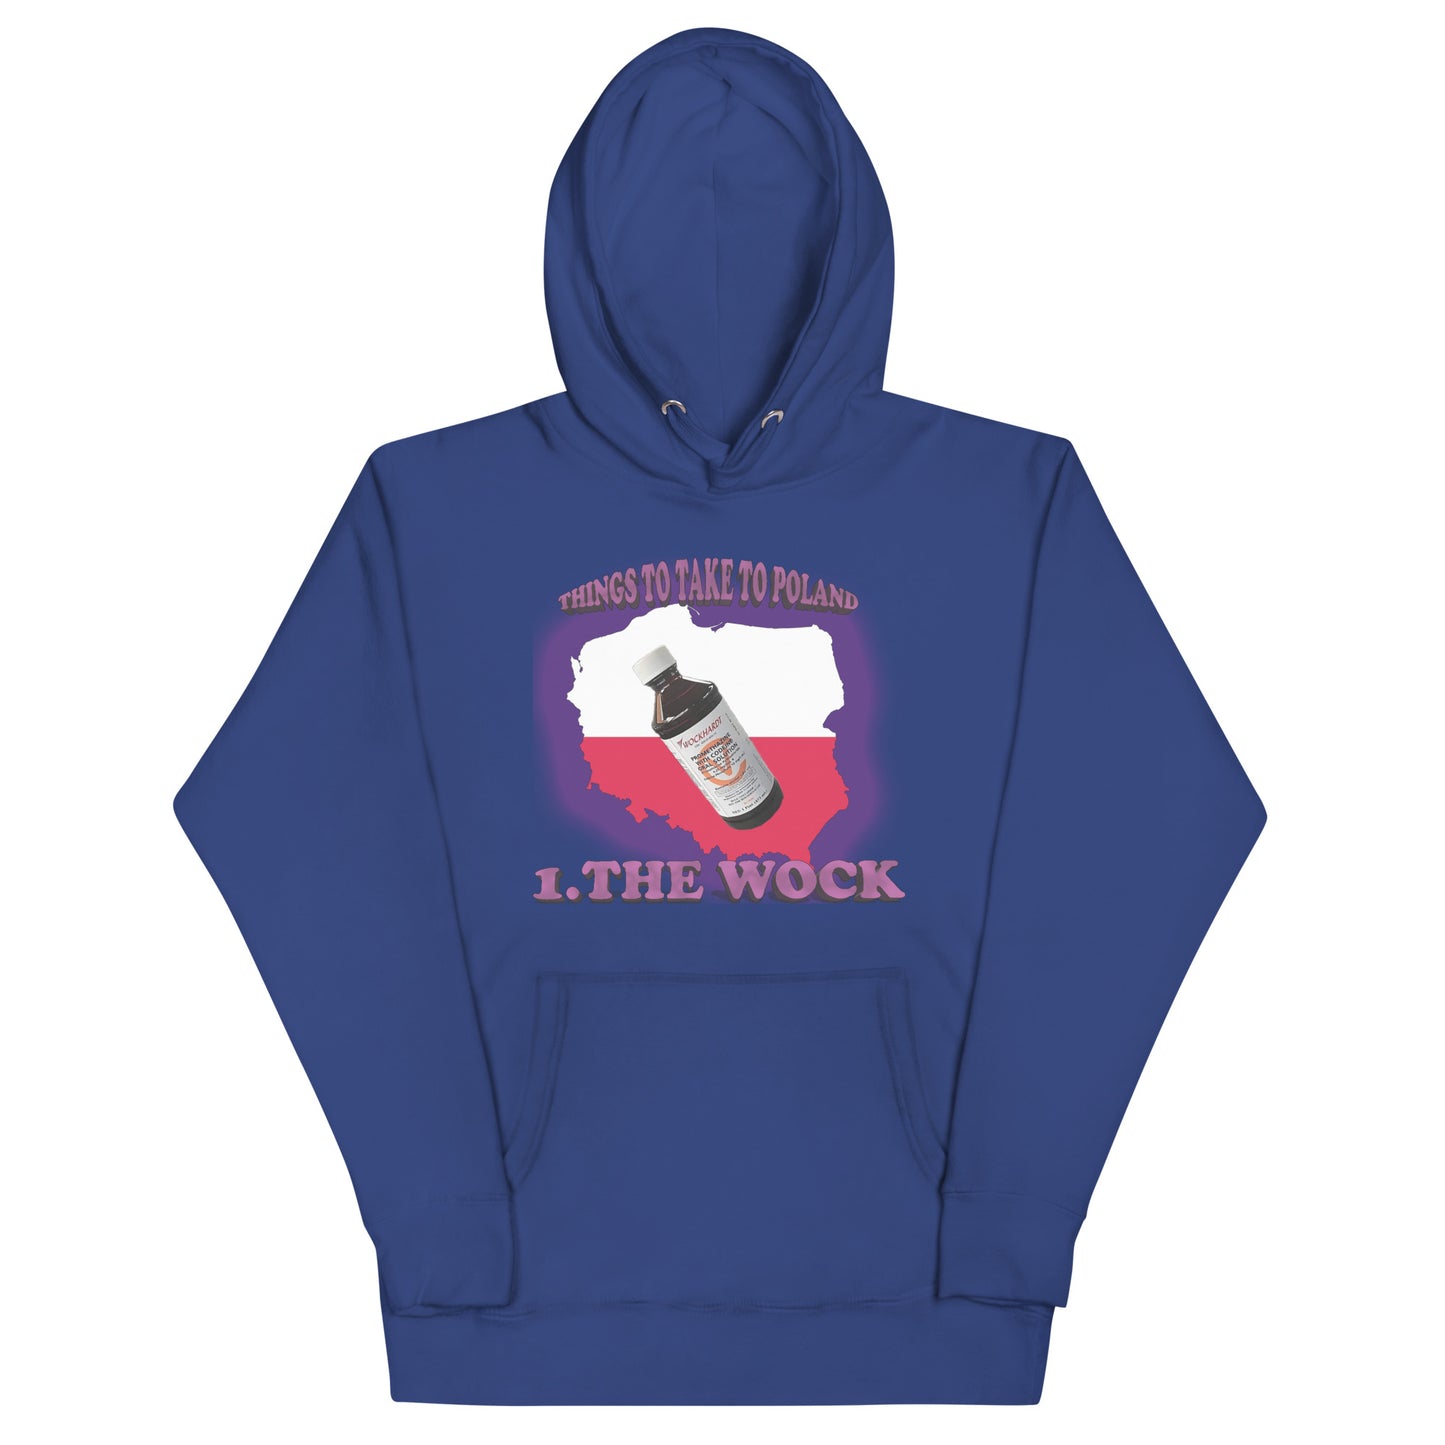 Wock To Poland Hoodie